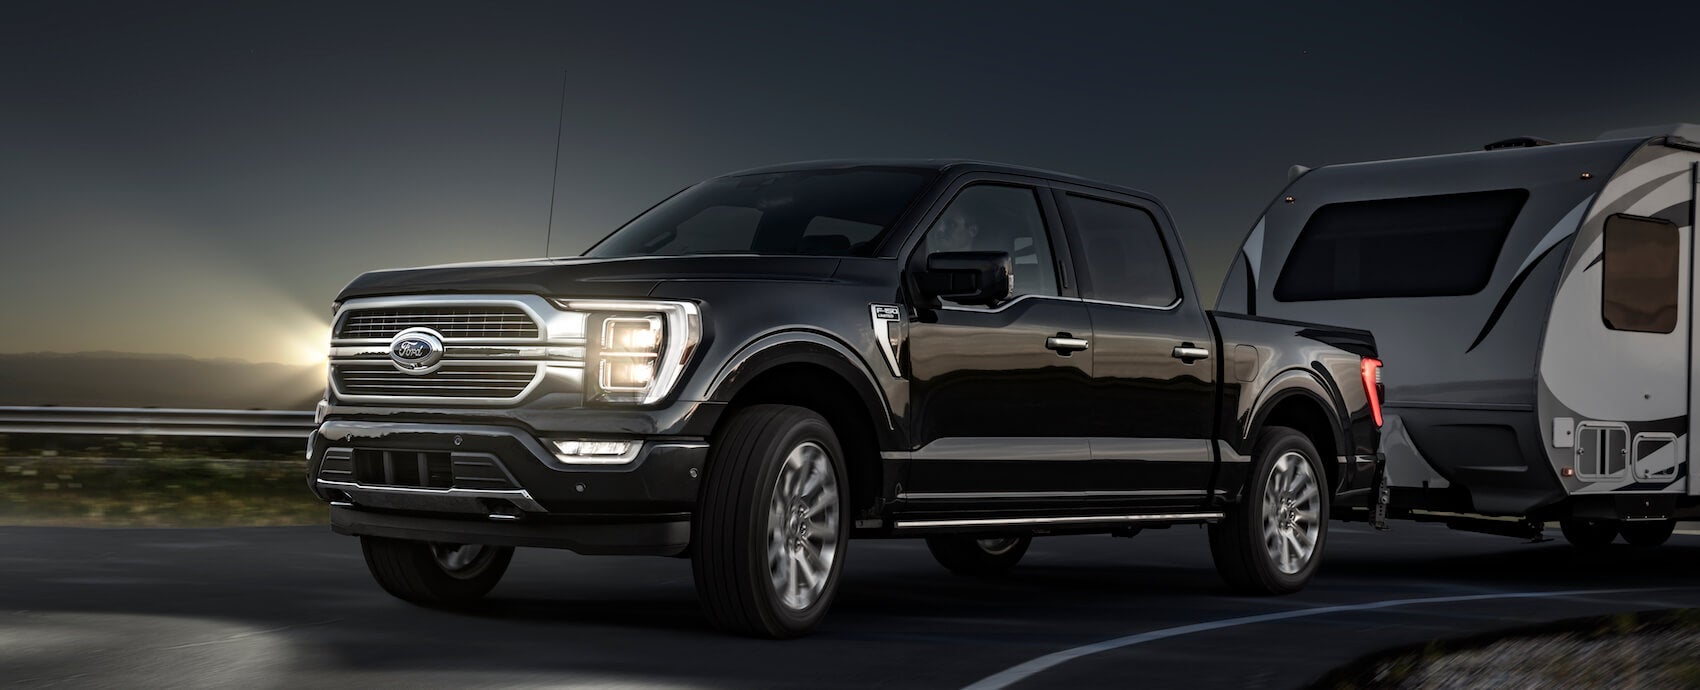 2021 Ford F-150 dashboard lights guide